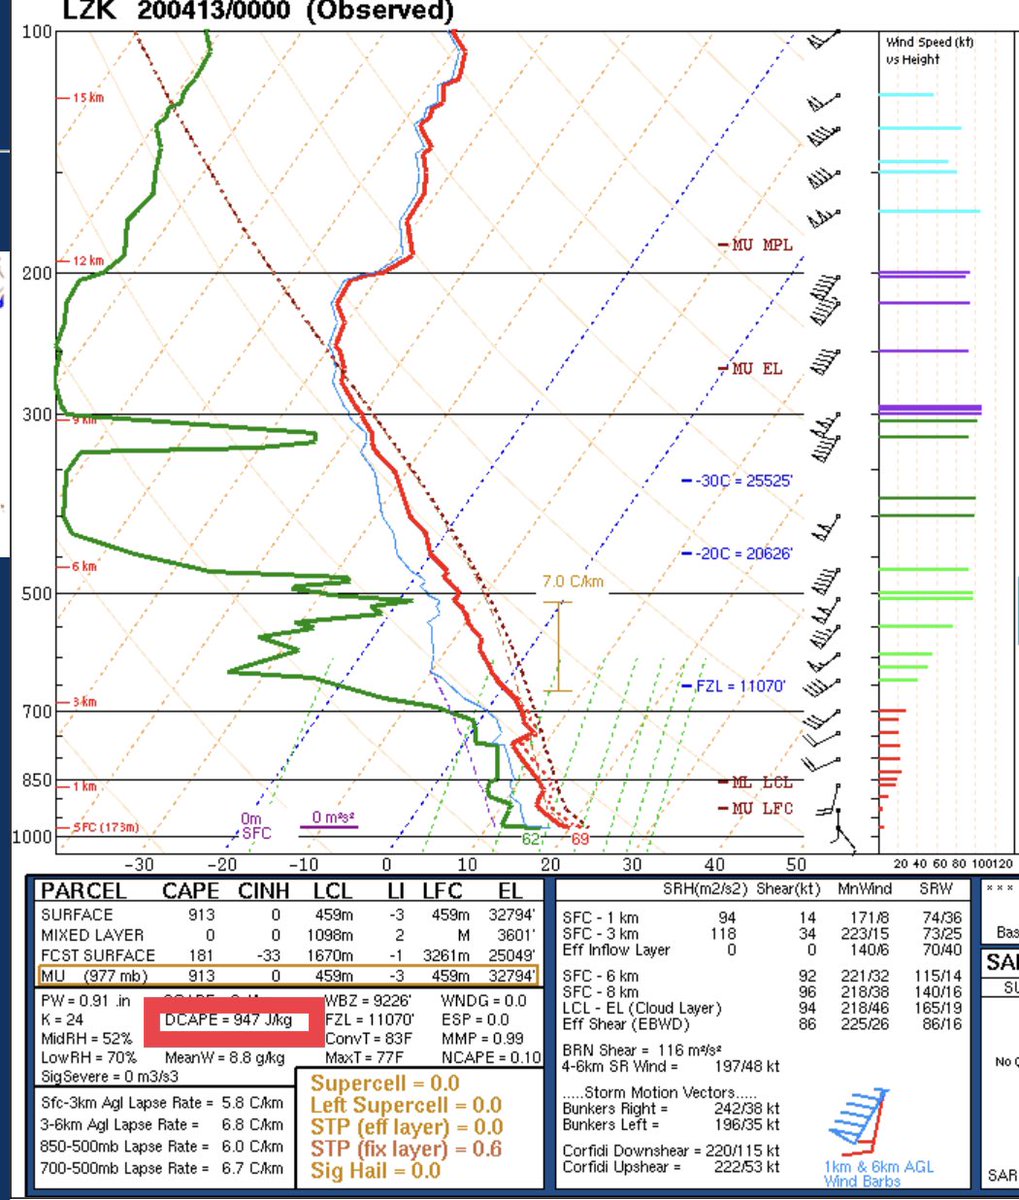 Yesterday mornings storms no doubt led to some stabilization, but sunshine and a little bit of moisture recovery led to just enough instability for a big severe threat Sun PM. One thing that caught my eye was the presence of downdraft CAPE in the evening sounding at LZK yesterday